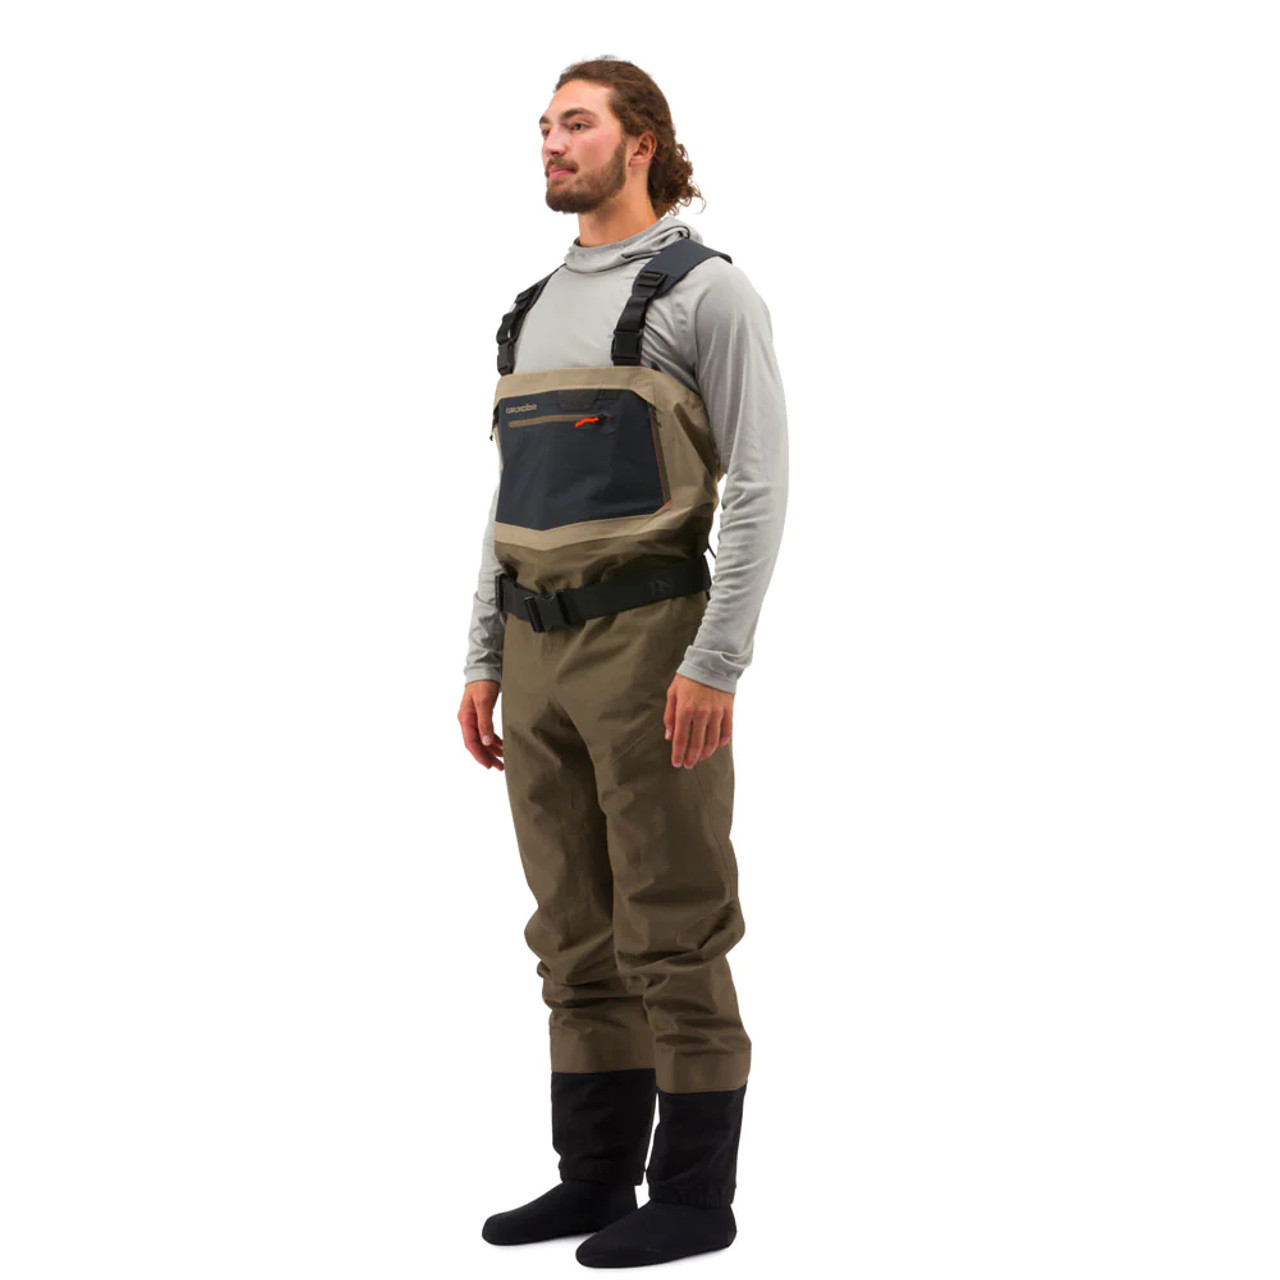 GRUNDENS M'S BOUNDARY STOCKINGFOOT WADERS boundary m's wader size:large tall 12-13 boundary m's wader colour:stone/otter